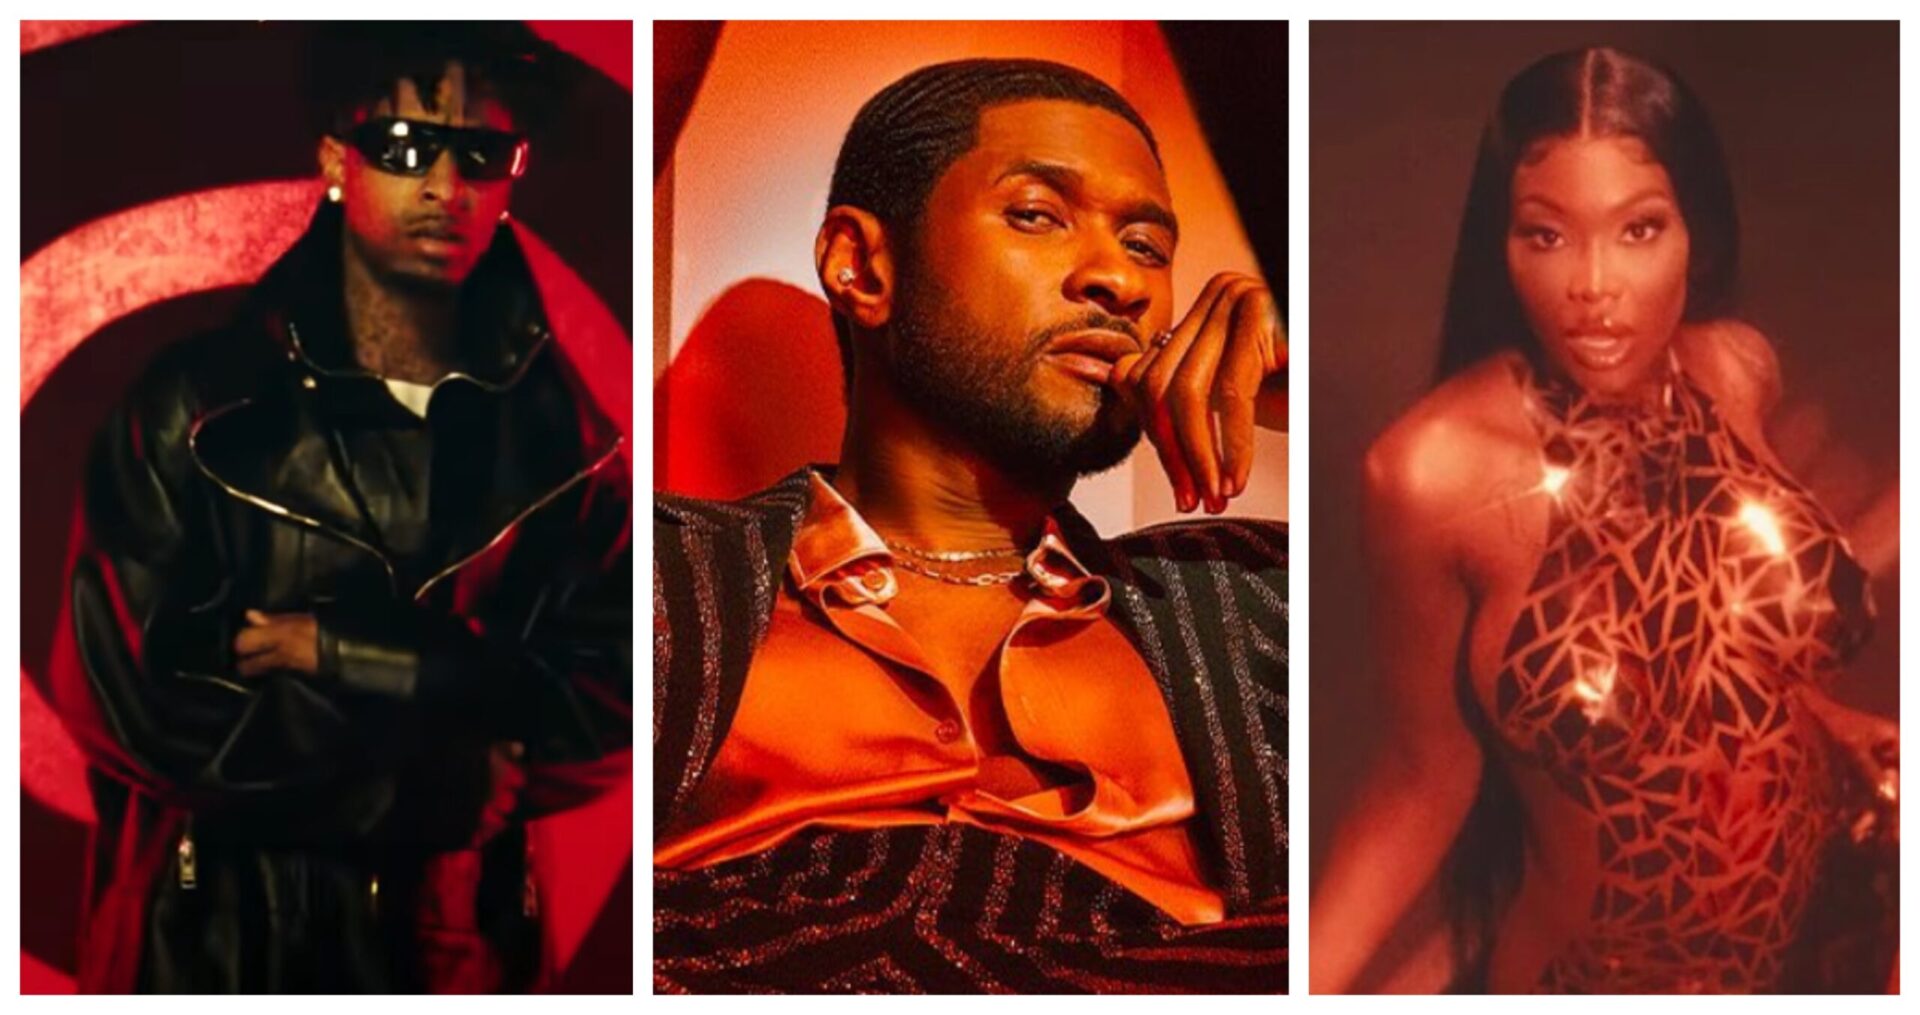 "Usher, Summer Walker, and 21 Savage Unite in 'Good Good' Collaboration for a Sensational Musical Treat"